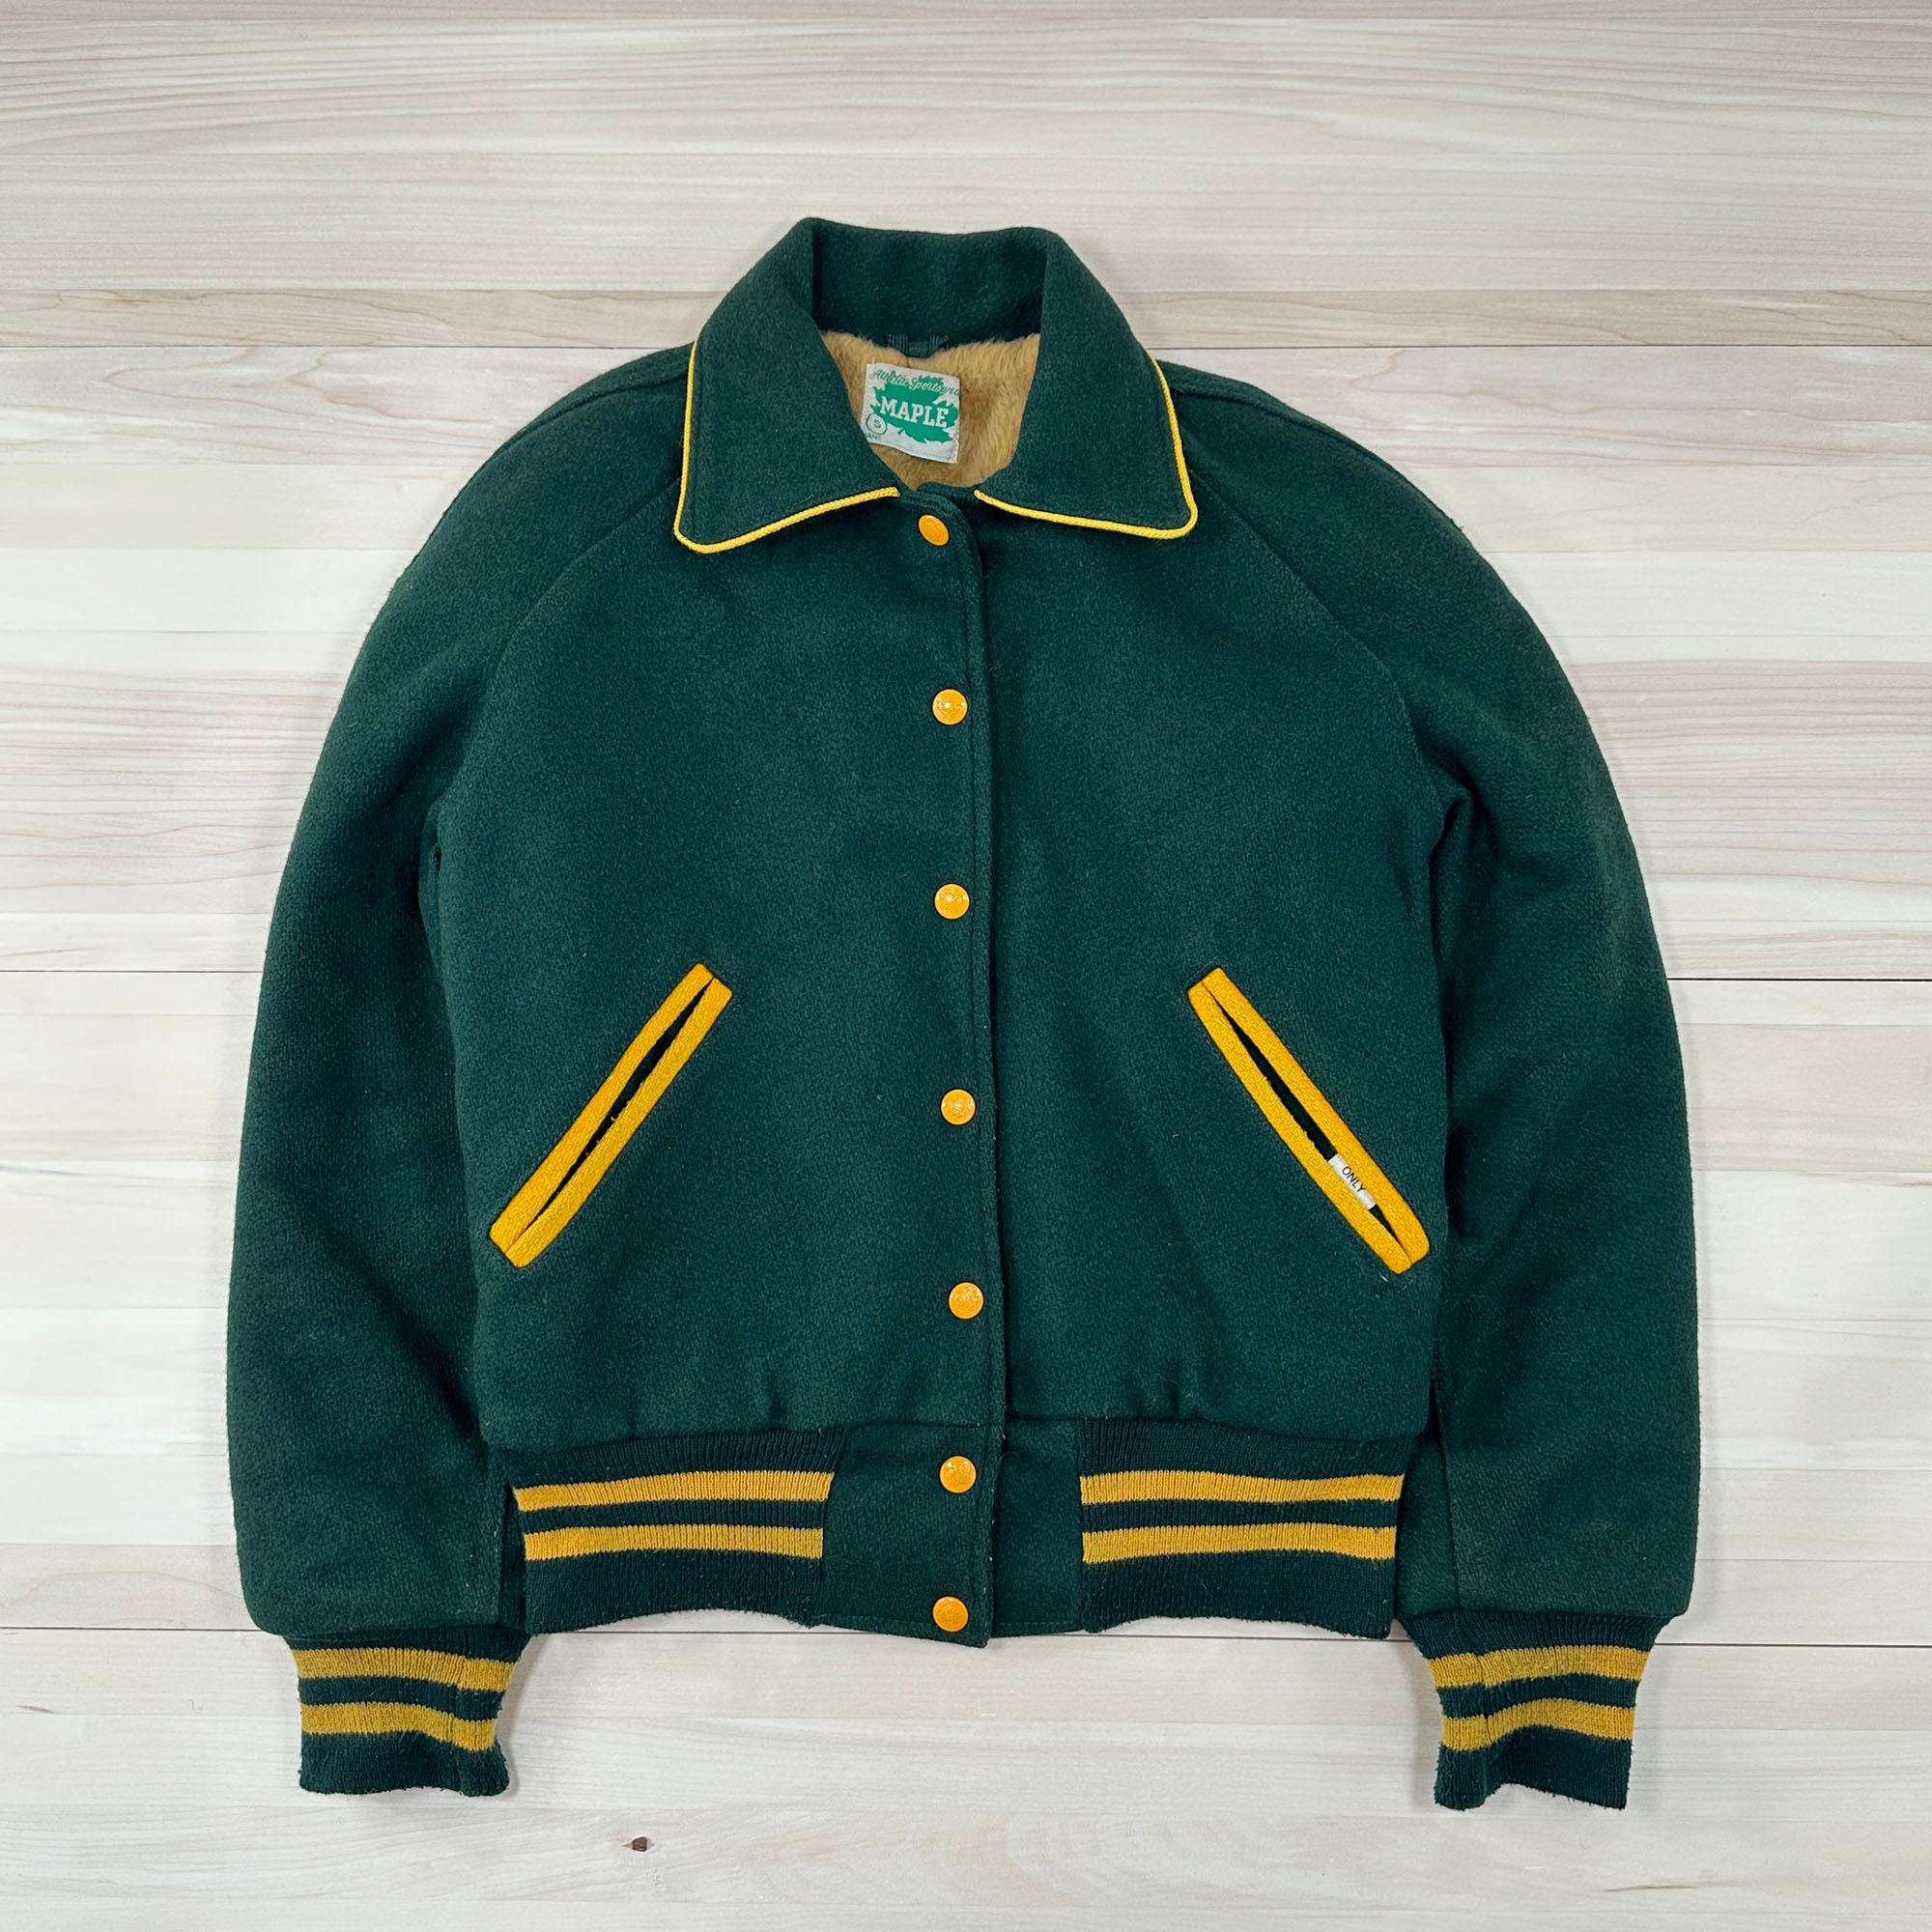 Vintage Maple Wool Varsity Jacket Packers Green and Gold - Small-1